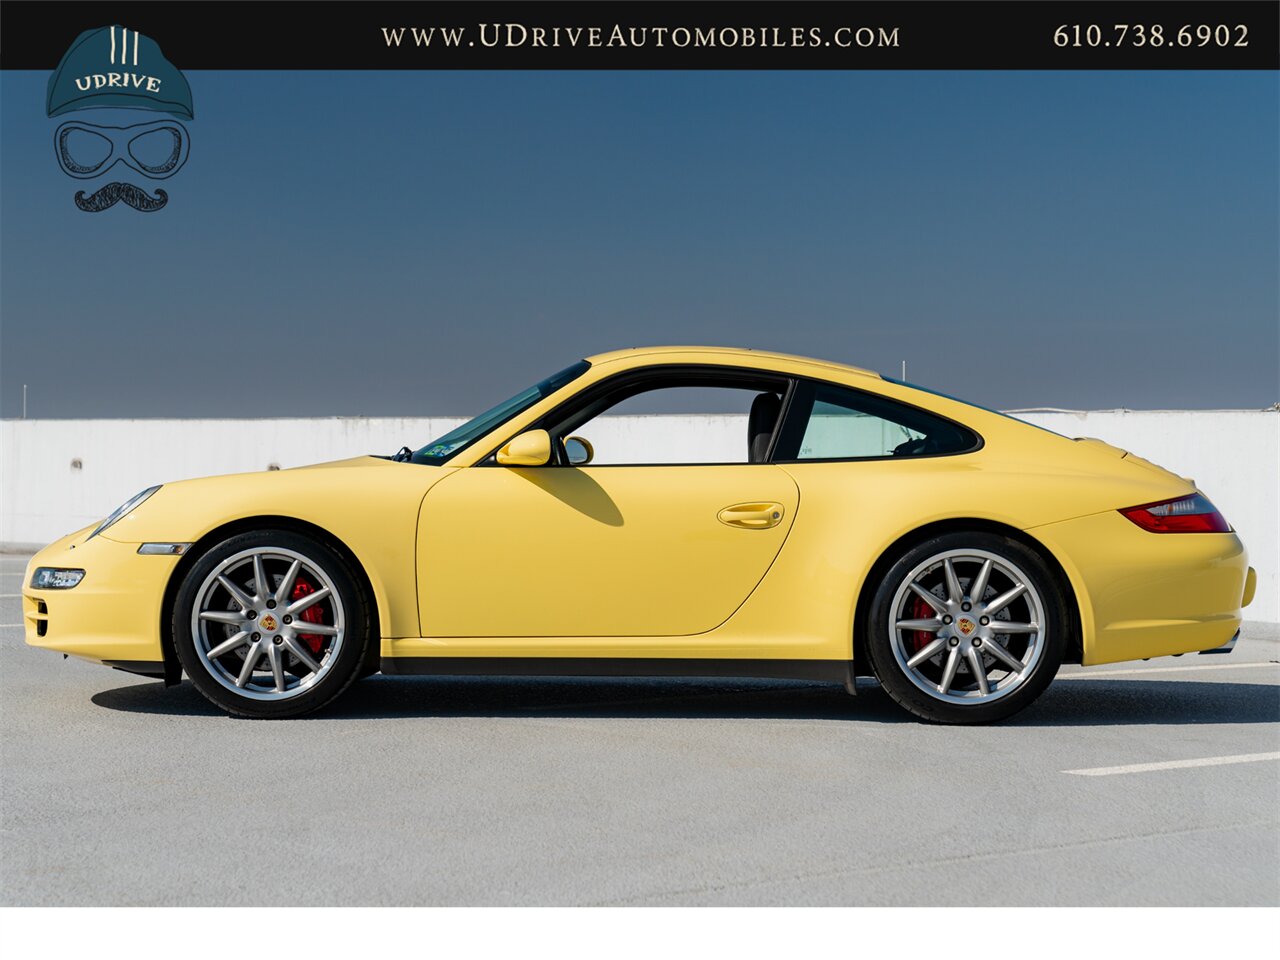 2007 Porsche 911 Carrera 4S 997 C4S Paint To Sample Pastel Yellow  6 Speed Sport Chrono Full Leather Yellow Gauges - Photo 8 - West Chester, PA 19382